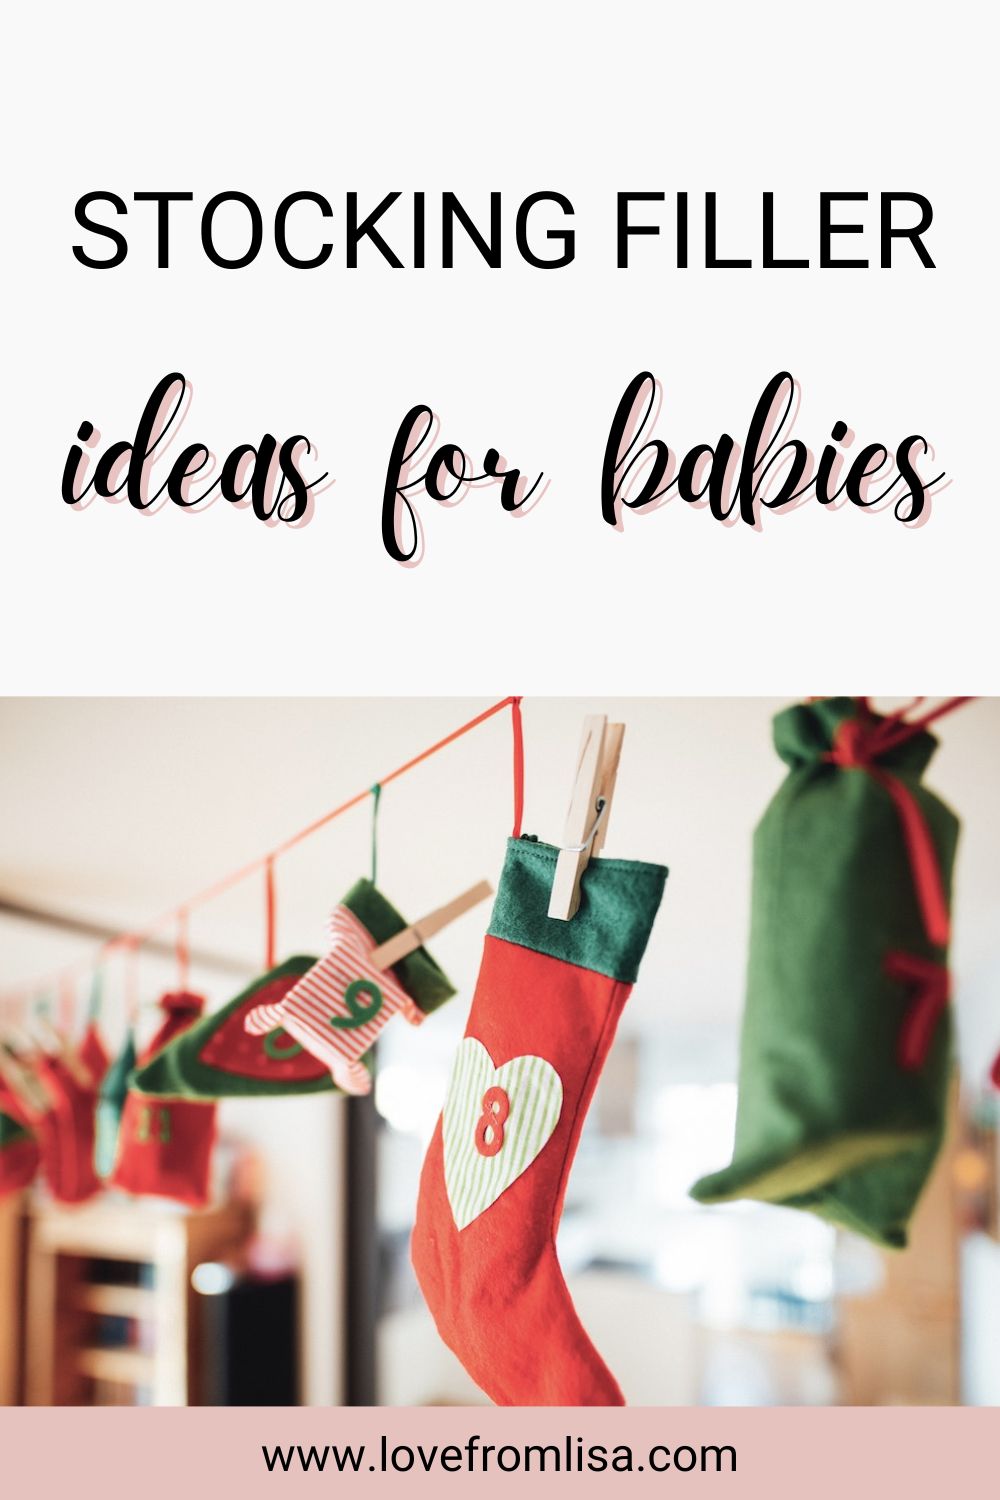 Stocking filler ideas for babies